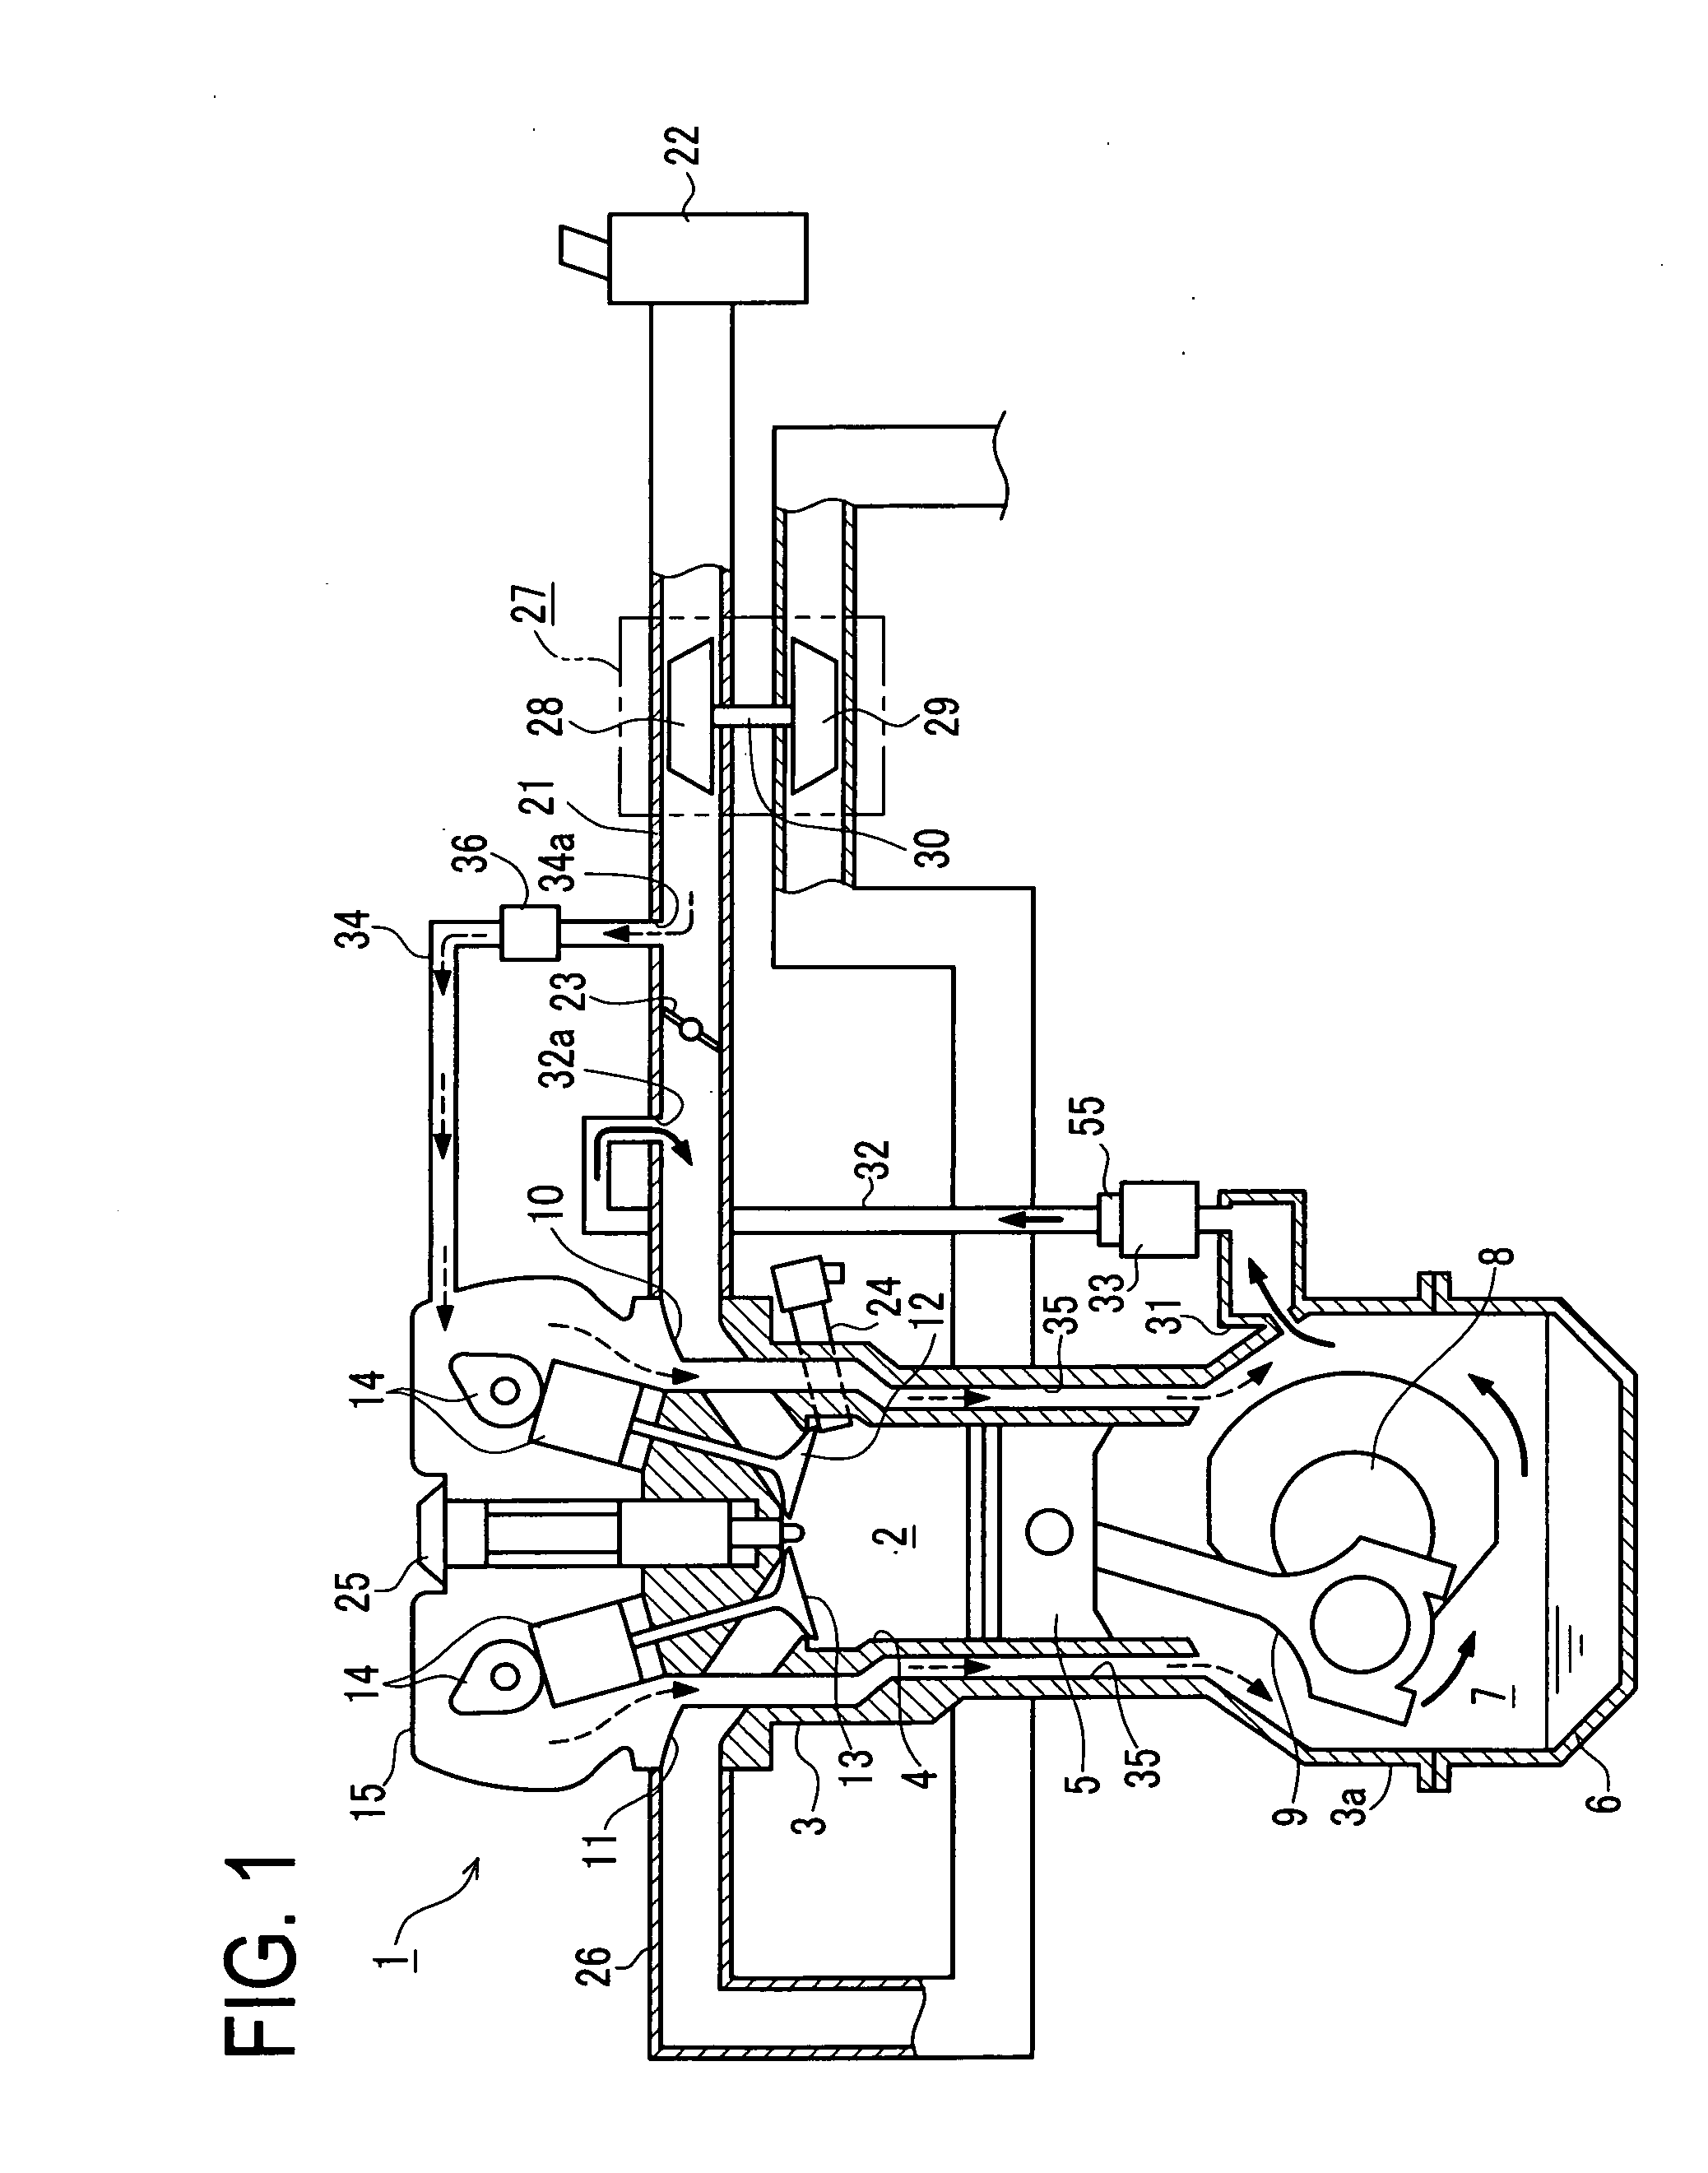 Engine blow-by gas returning apparatus